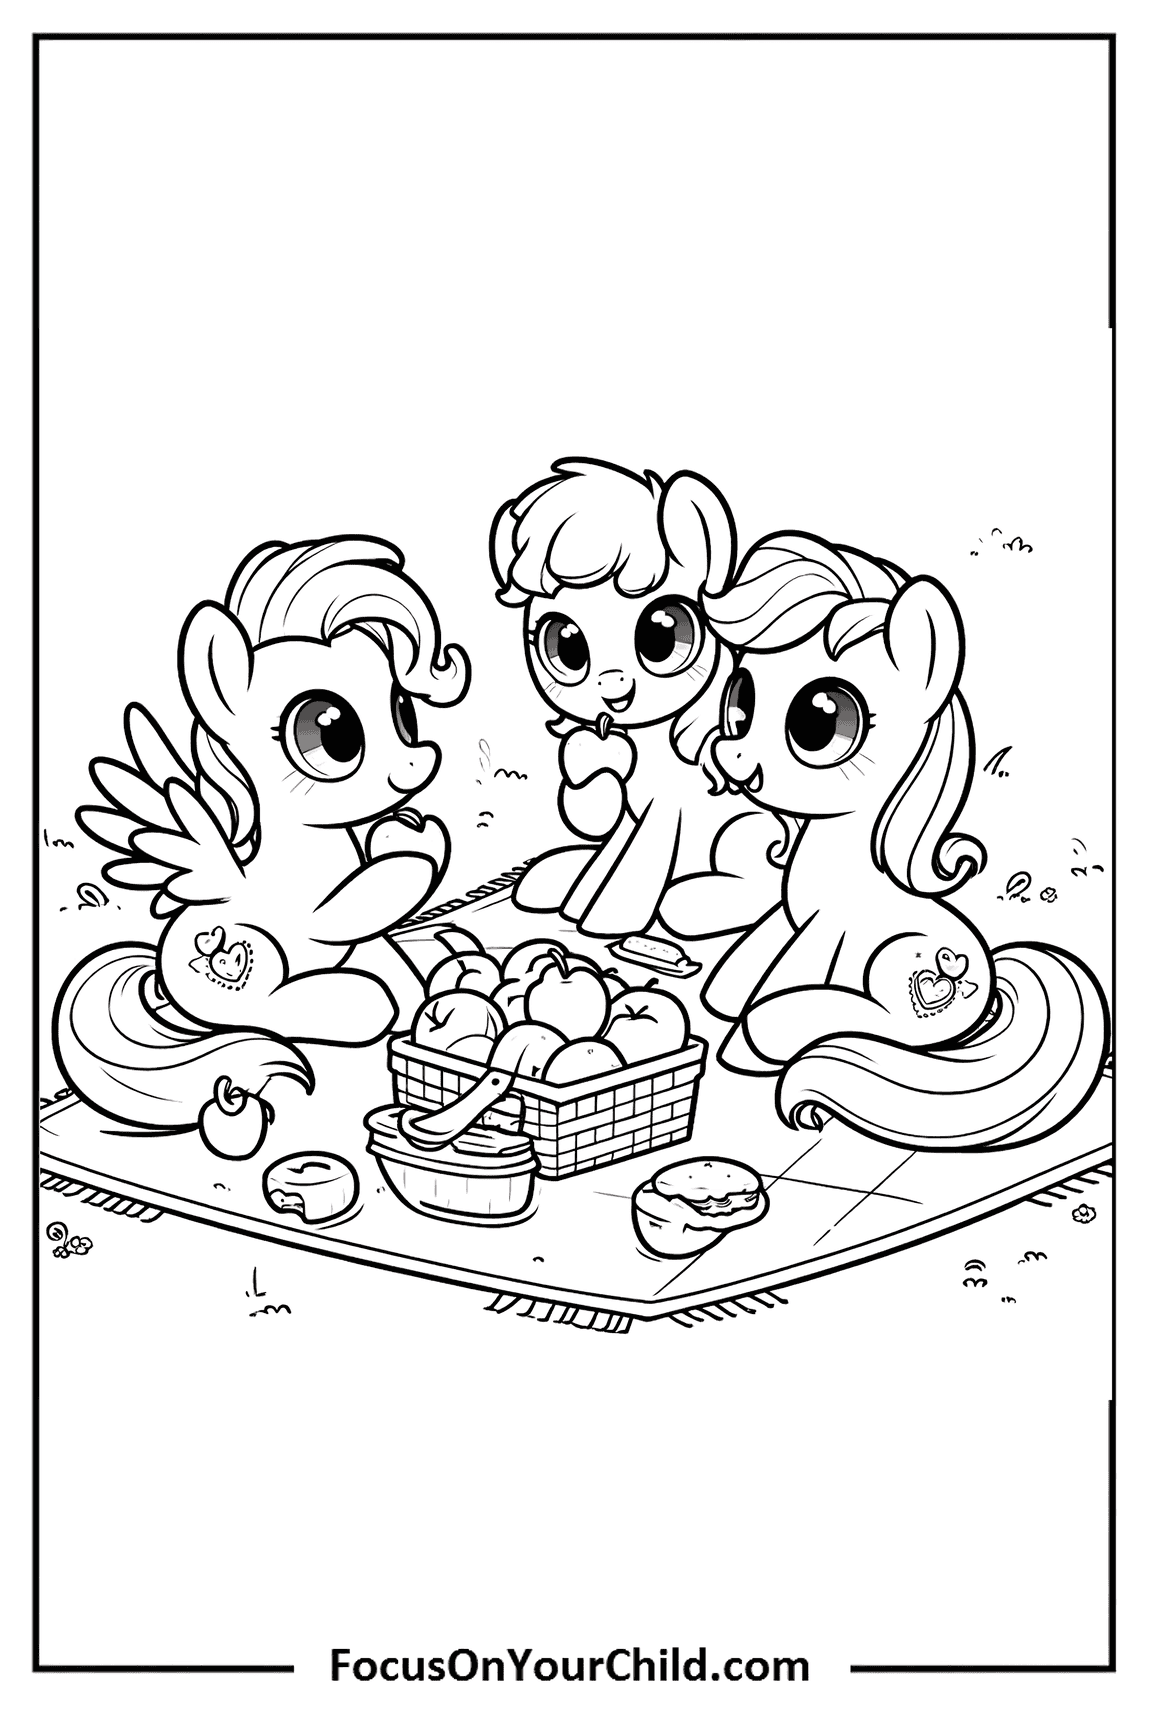 Adorable pony picnic illustration with apples and heart cutie mark on grassy field.